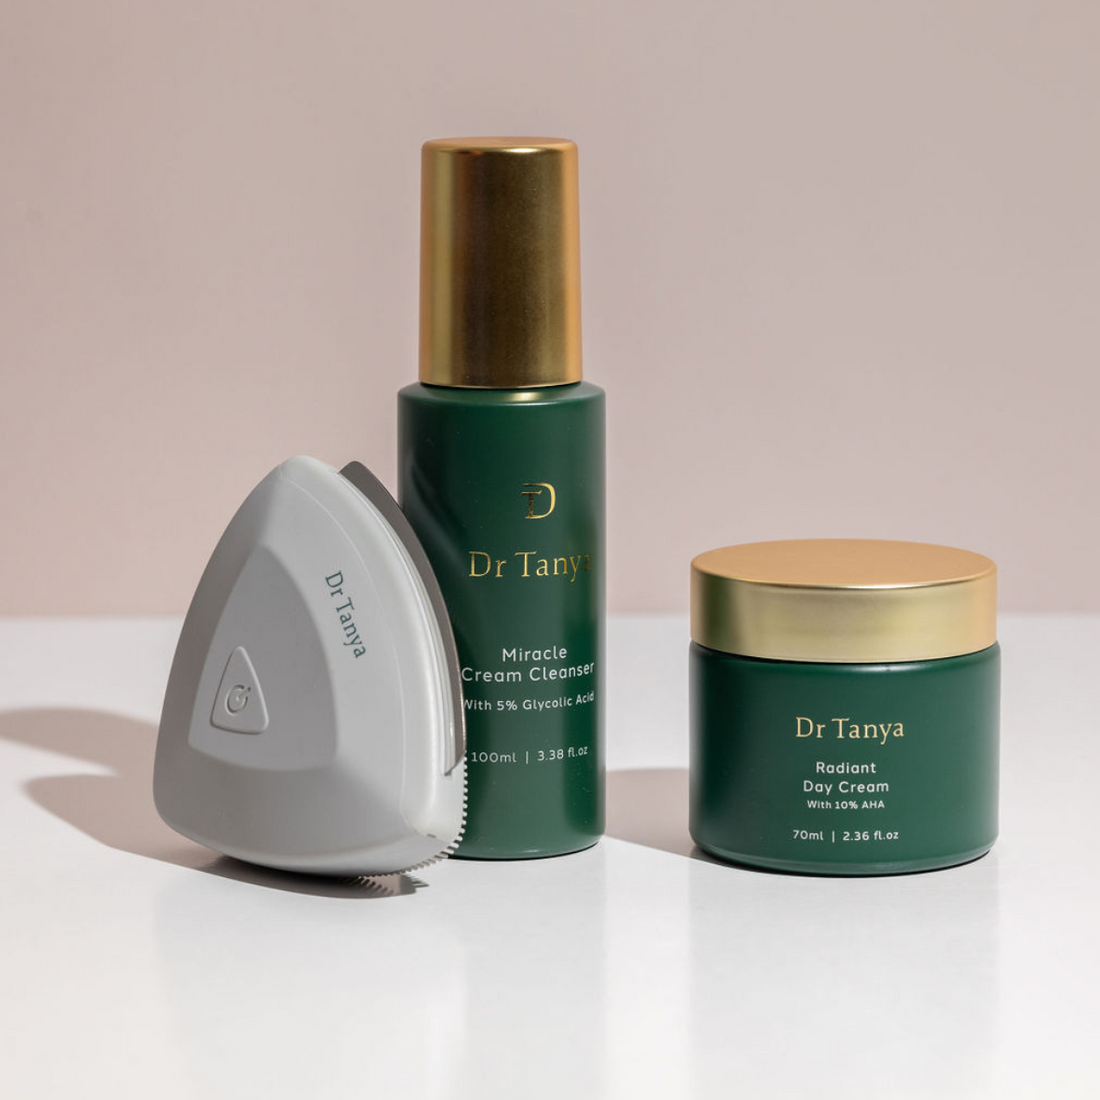 A Dr Tanya Nusonic exfoliator propped against a green bottle of cleanser and a green pot of facial cream